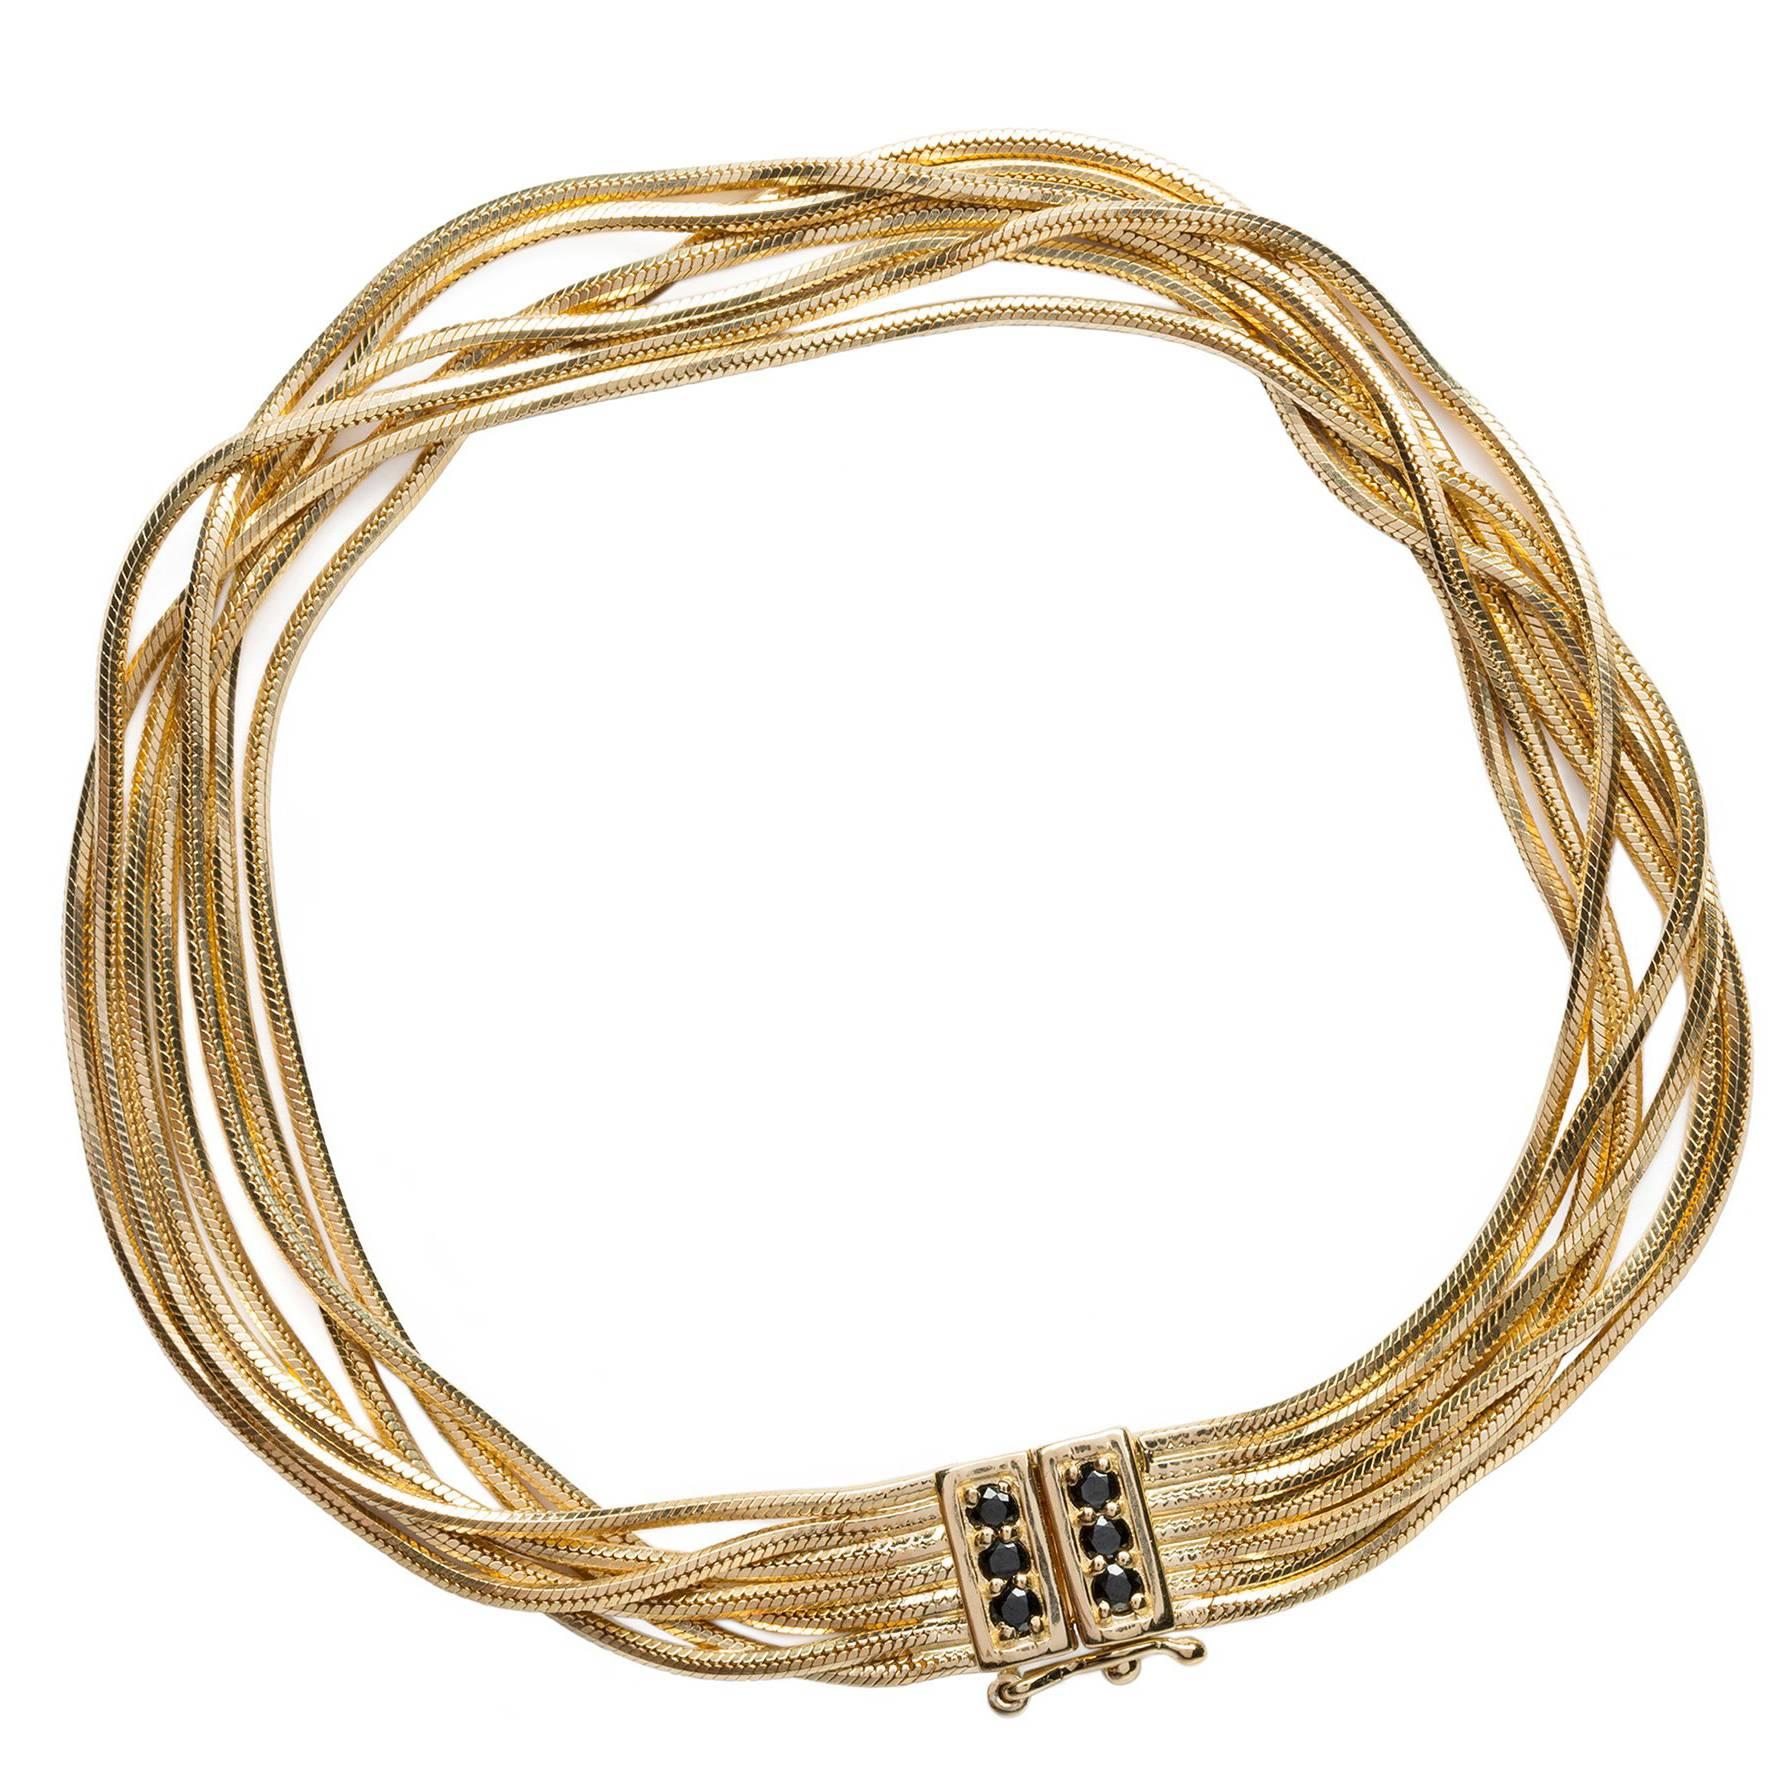 IOSSELLIANI gives to fine jewelry an innovative design with its custom made 18 karat gold multithread bracelet.  The 18 karat gold soft chain creates elegant movement, you can feel twisting, curving the piece around your wrist.  Beautifully stipped